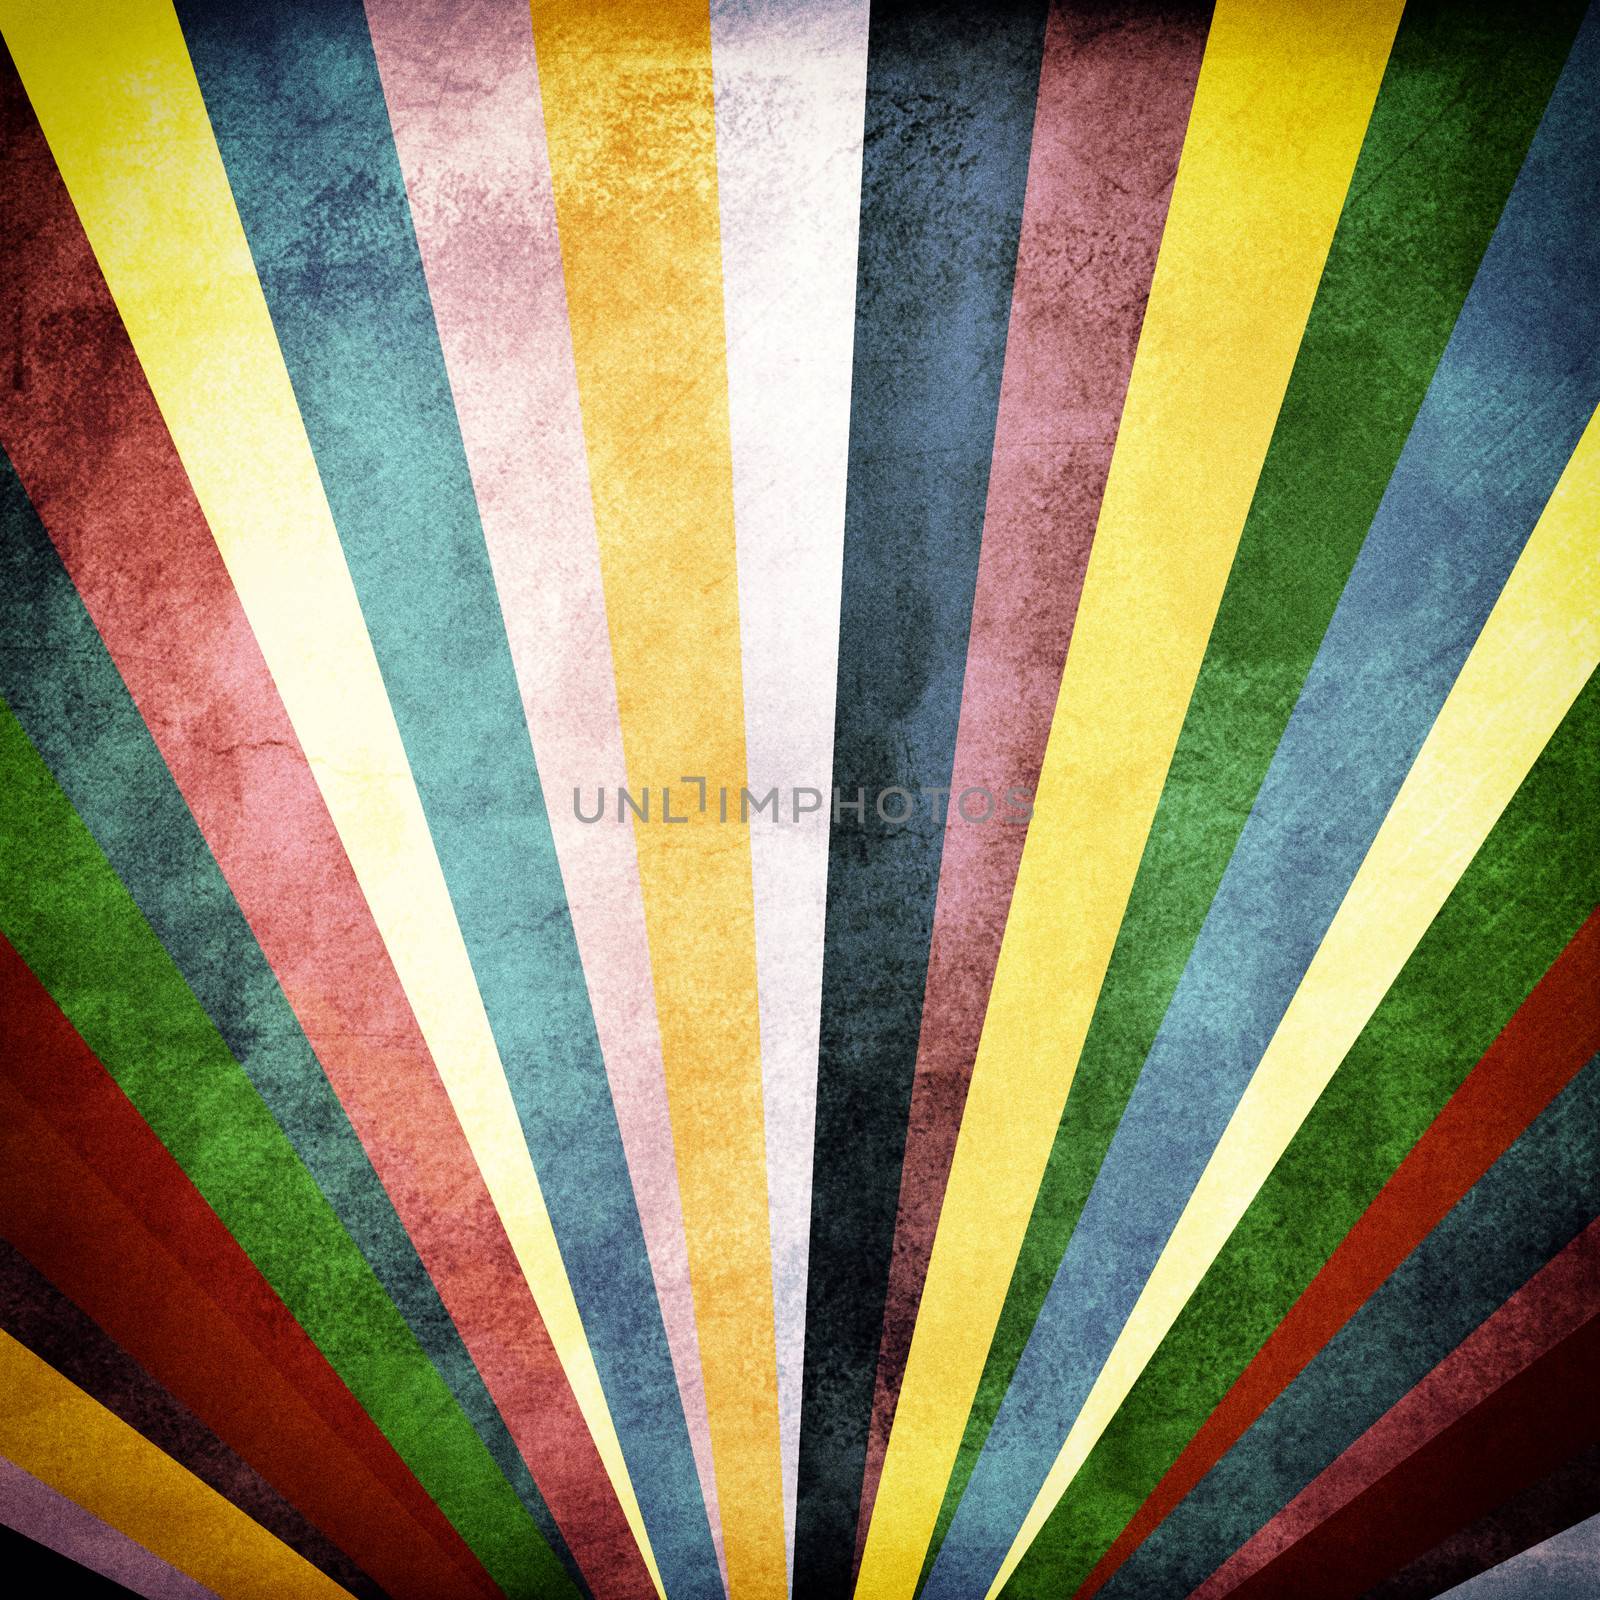 Colorful image with sun beam grunge texture on background